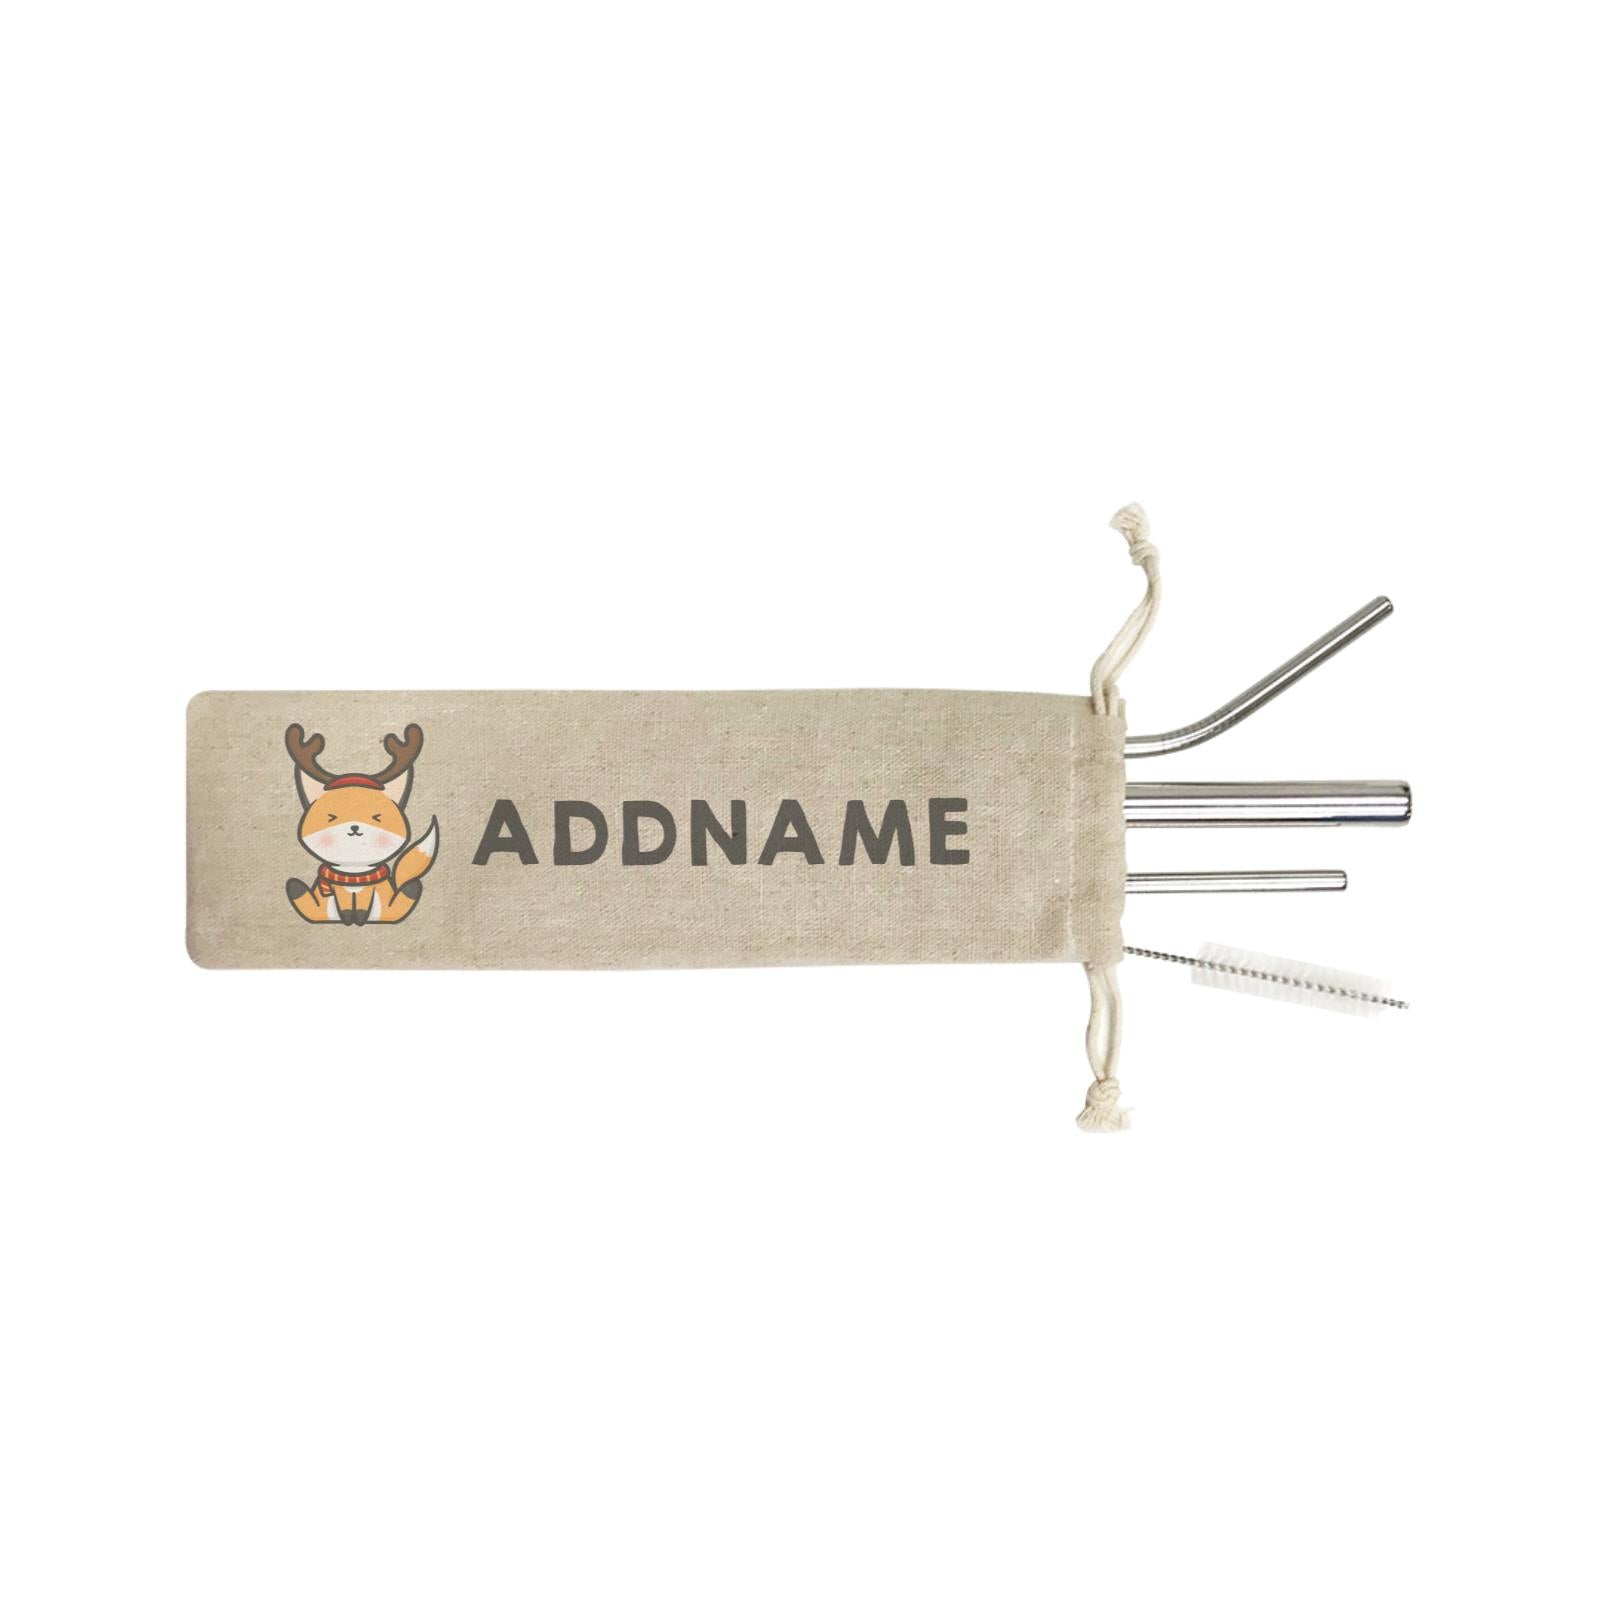 Xmas Cute Fox With Reindeer Antlers Addname SB 4-in-1 Stainless Steel Straw Set In a Satchel